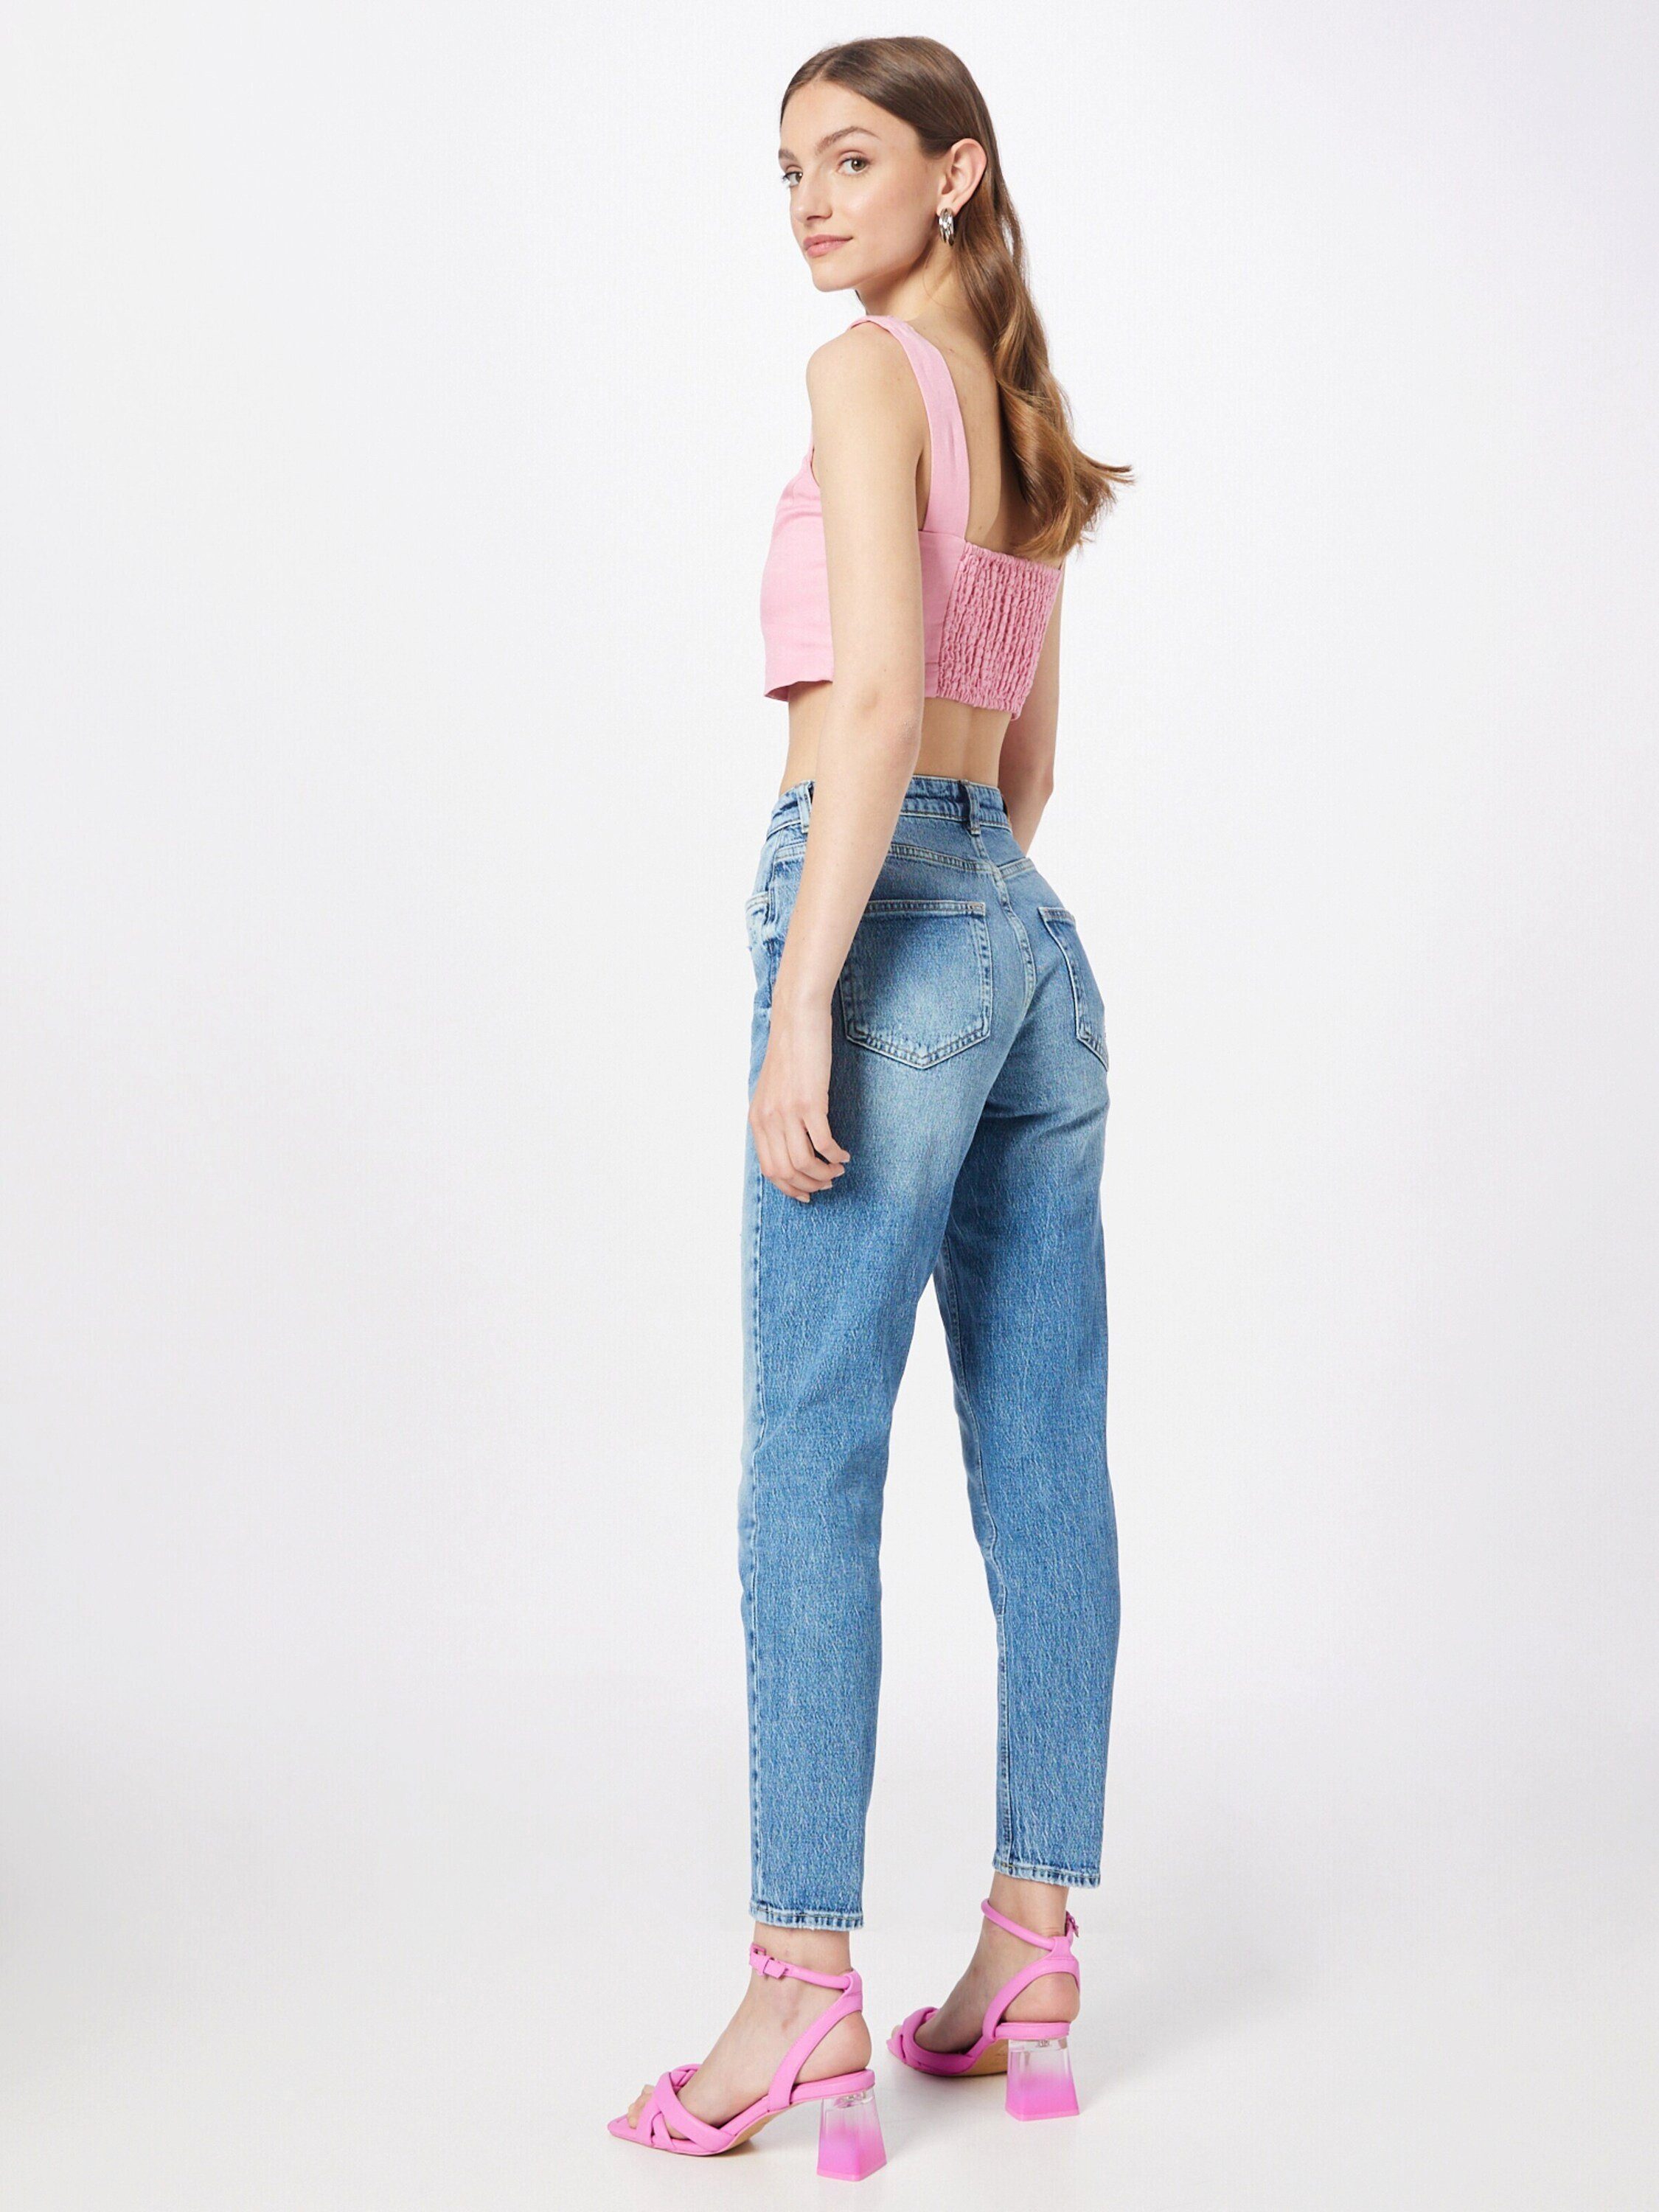 Patches, (1-tlg) Weiteres Detail Plain/ohne ONLY VENEDA 7/8-Jeans Details,